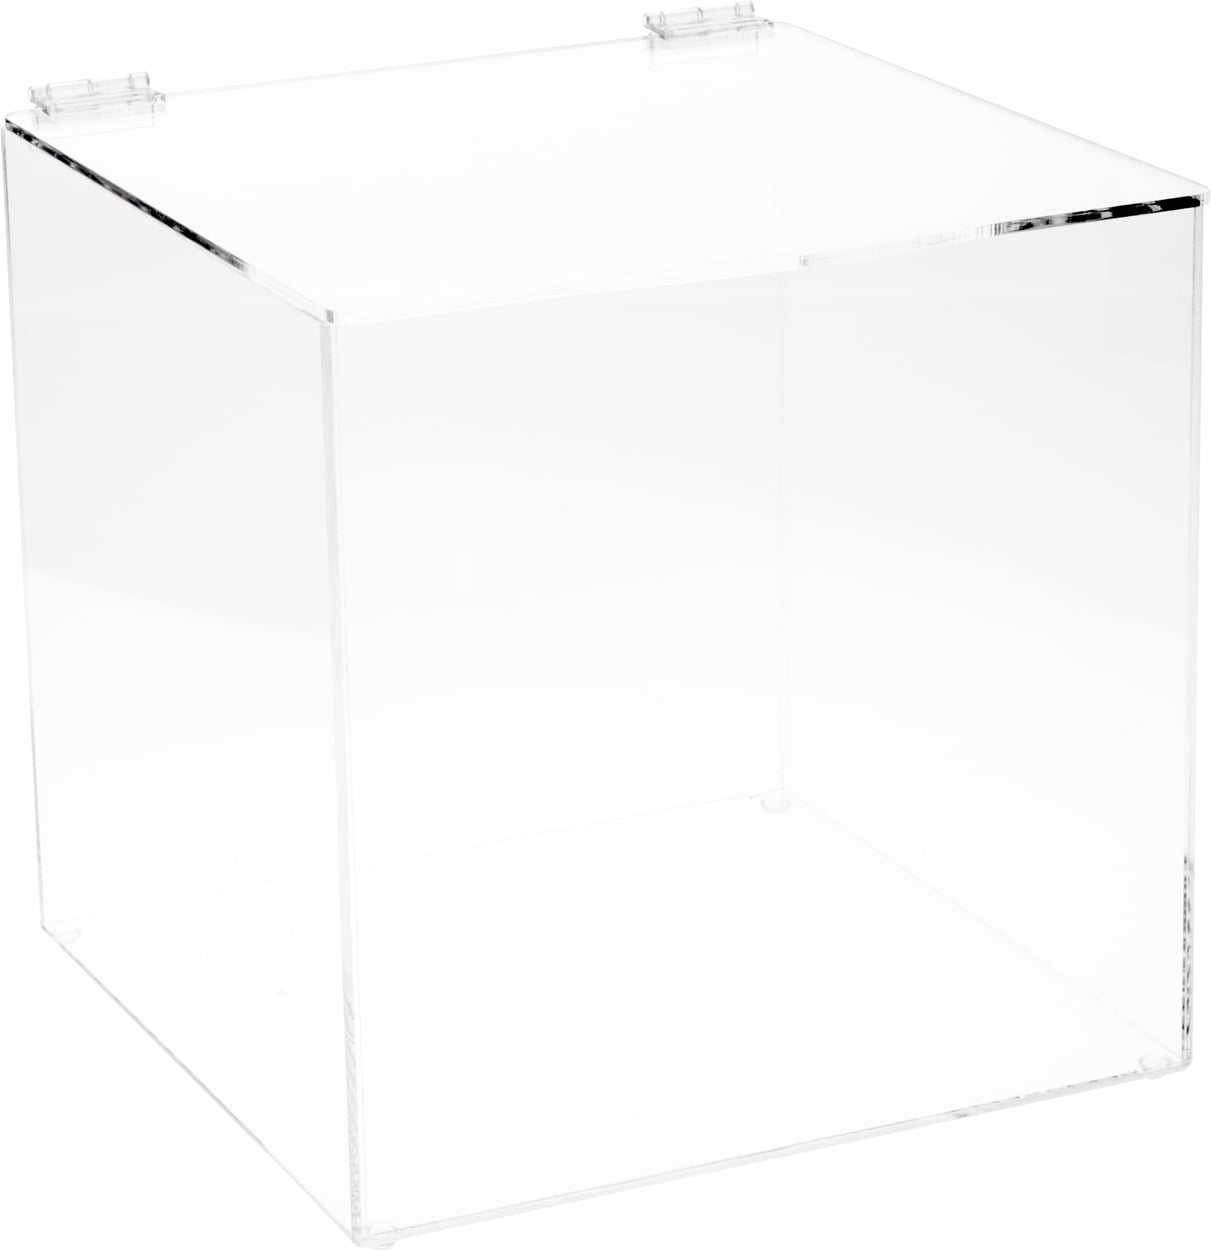 Plymor Clear Acrylic Square Open Top Merchandise Display Tray 12"W x 12"D x 2"H 